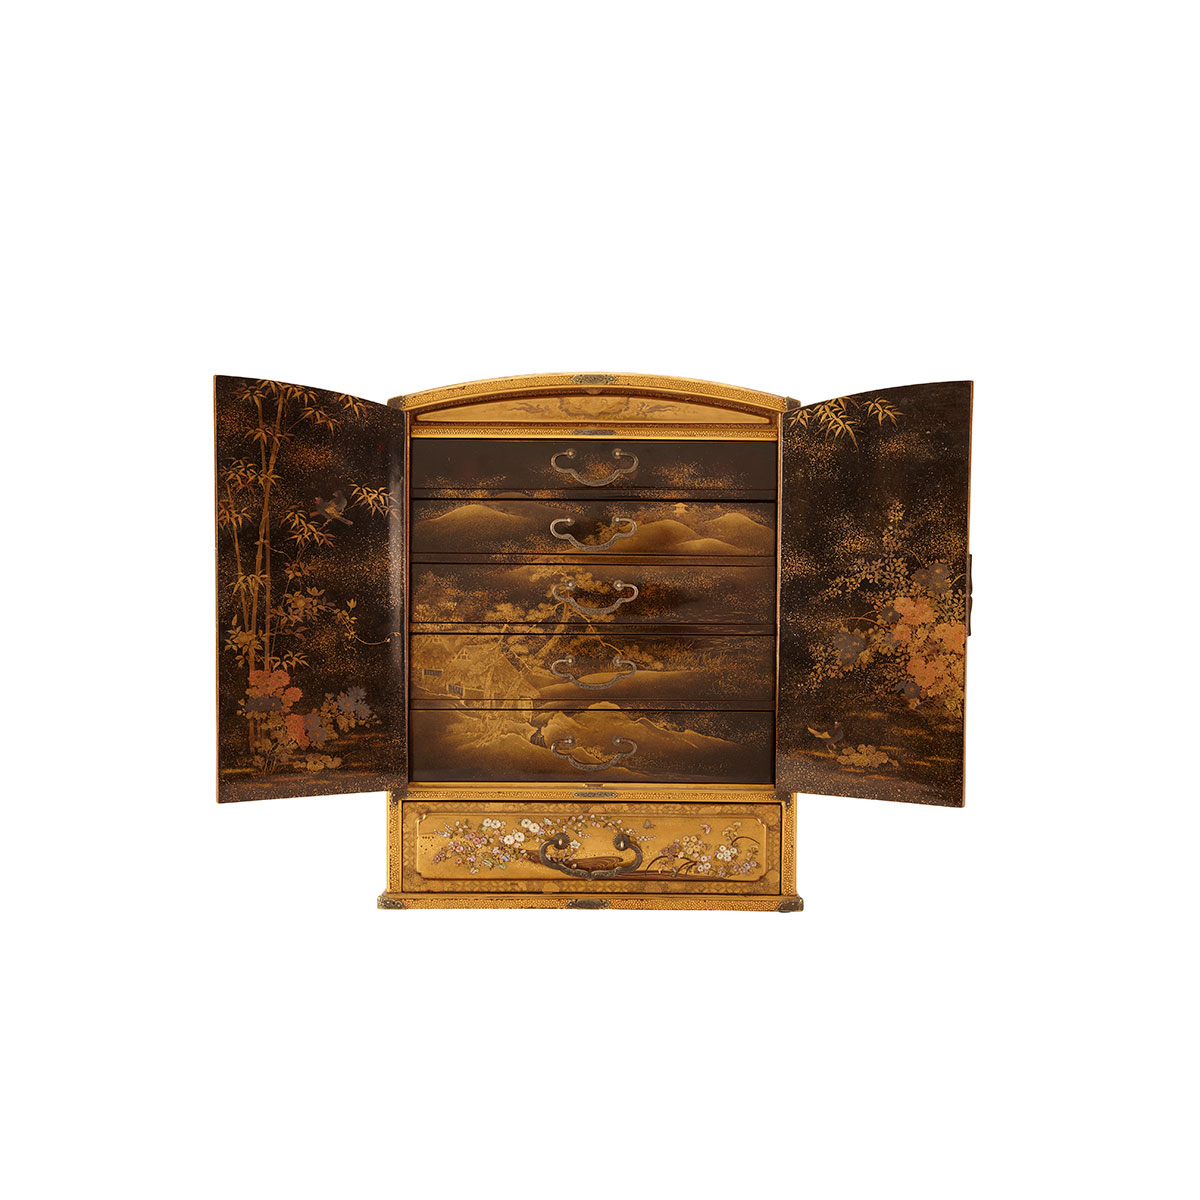 Magnificent Lacquer and Inlay Cabinet